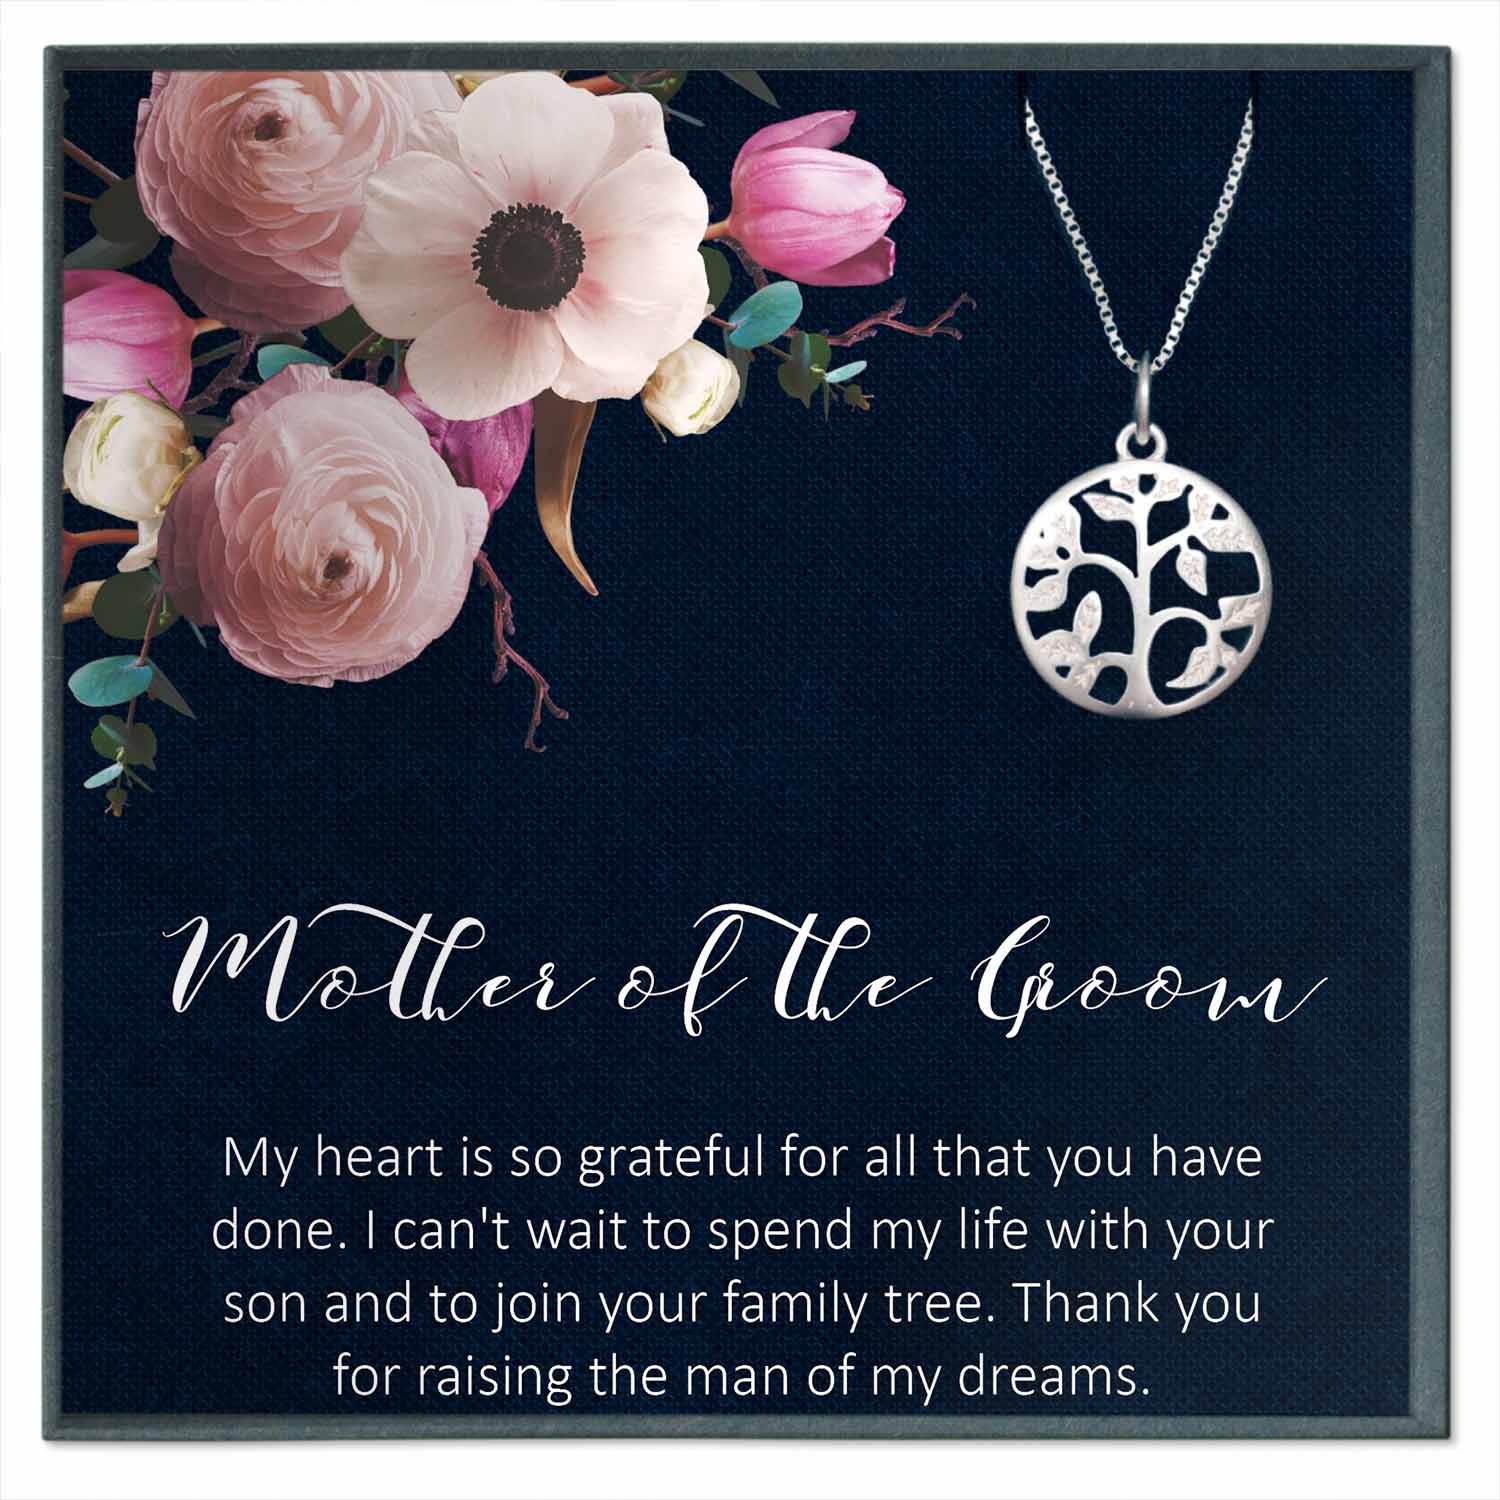 Mother of the Groom Necklace from Bride, Mother in Law Necklace Gift